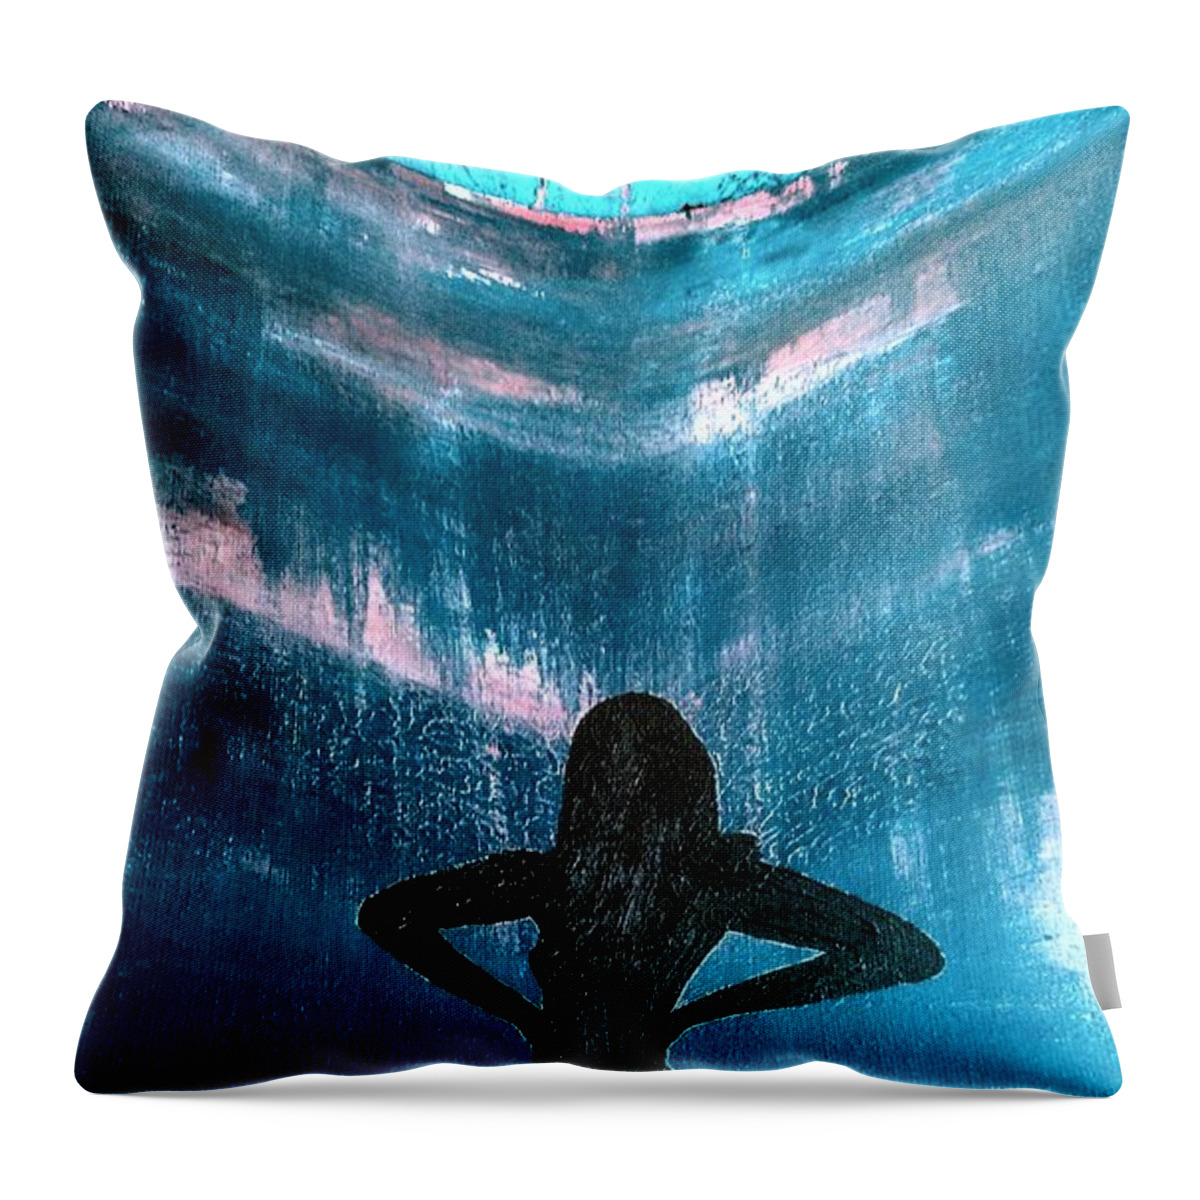 Unlimited Throw Pillow featuring the painting Unlimited by Jacqueline McReynolds